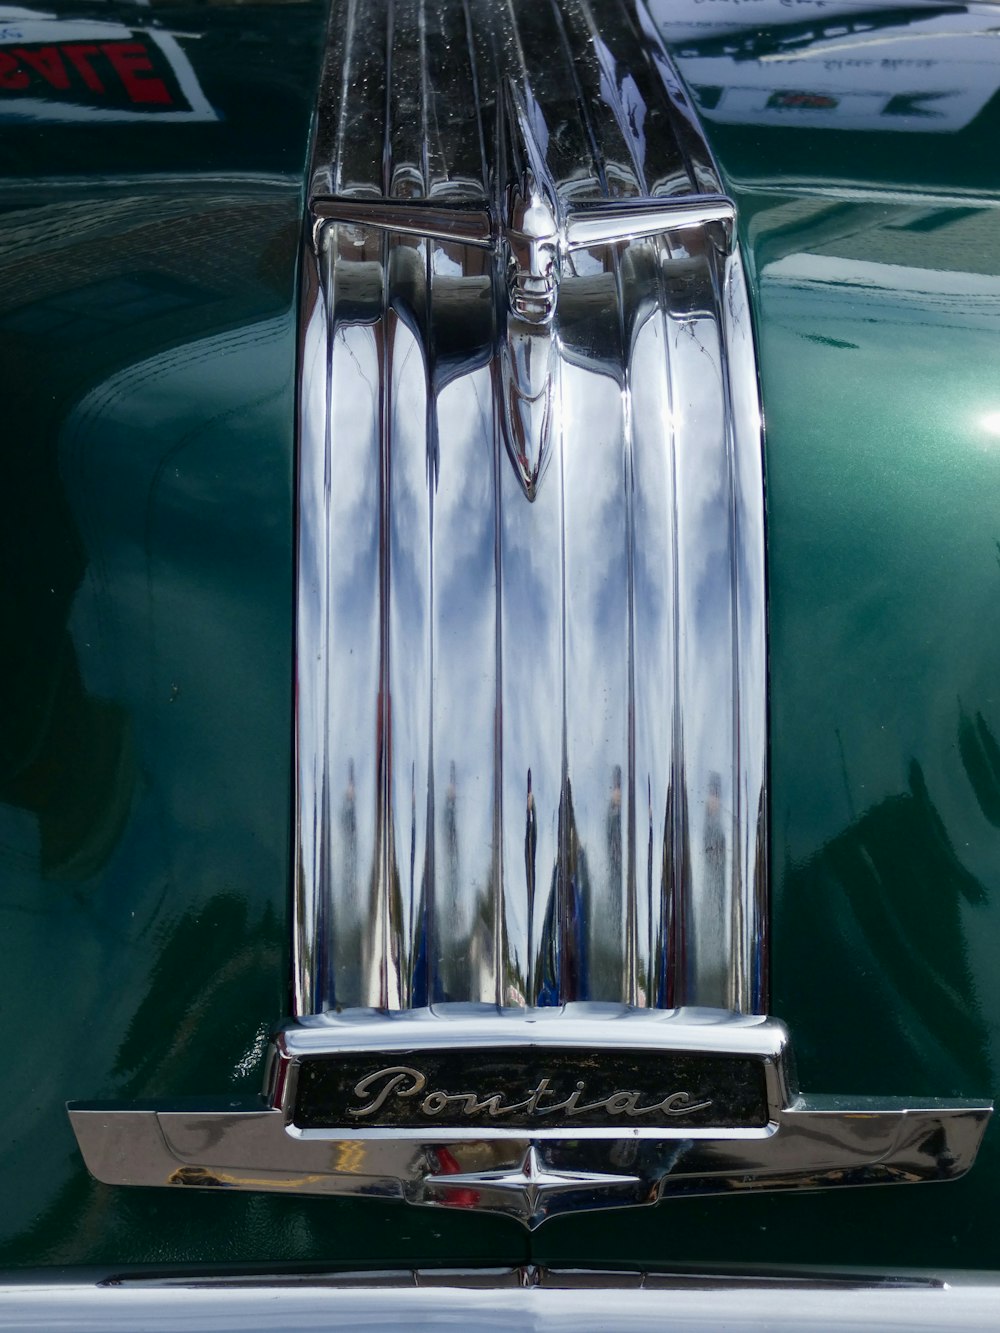 the front end of a green classic car